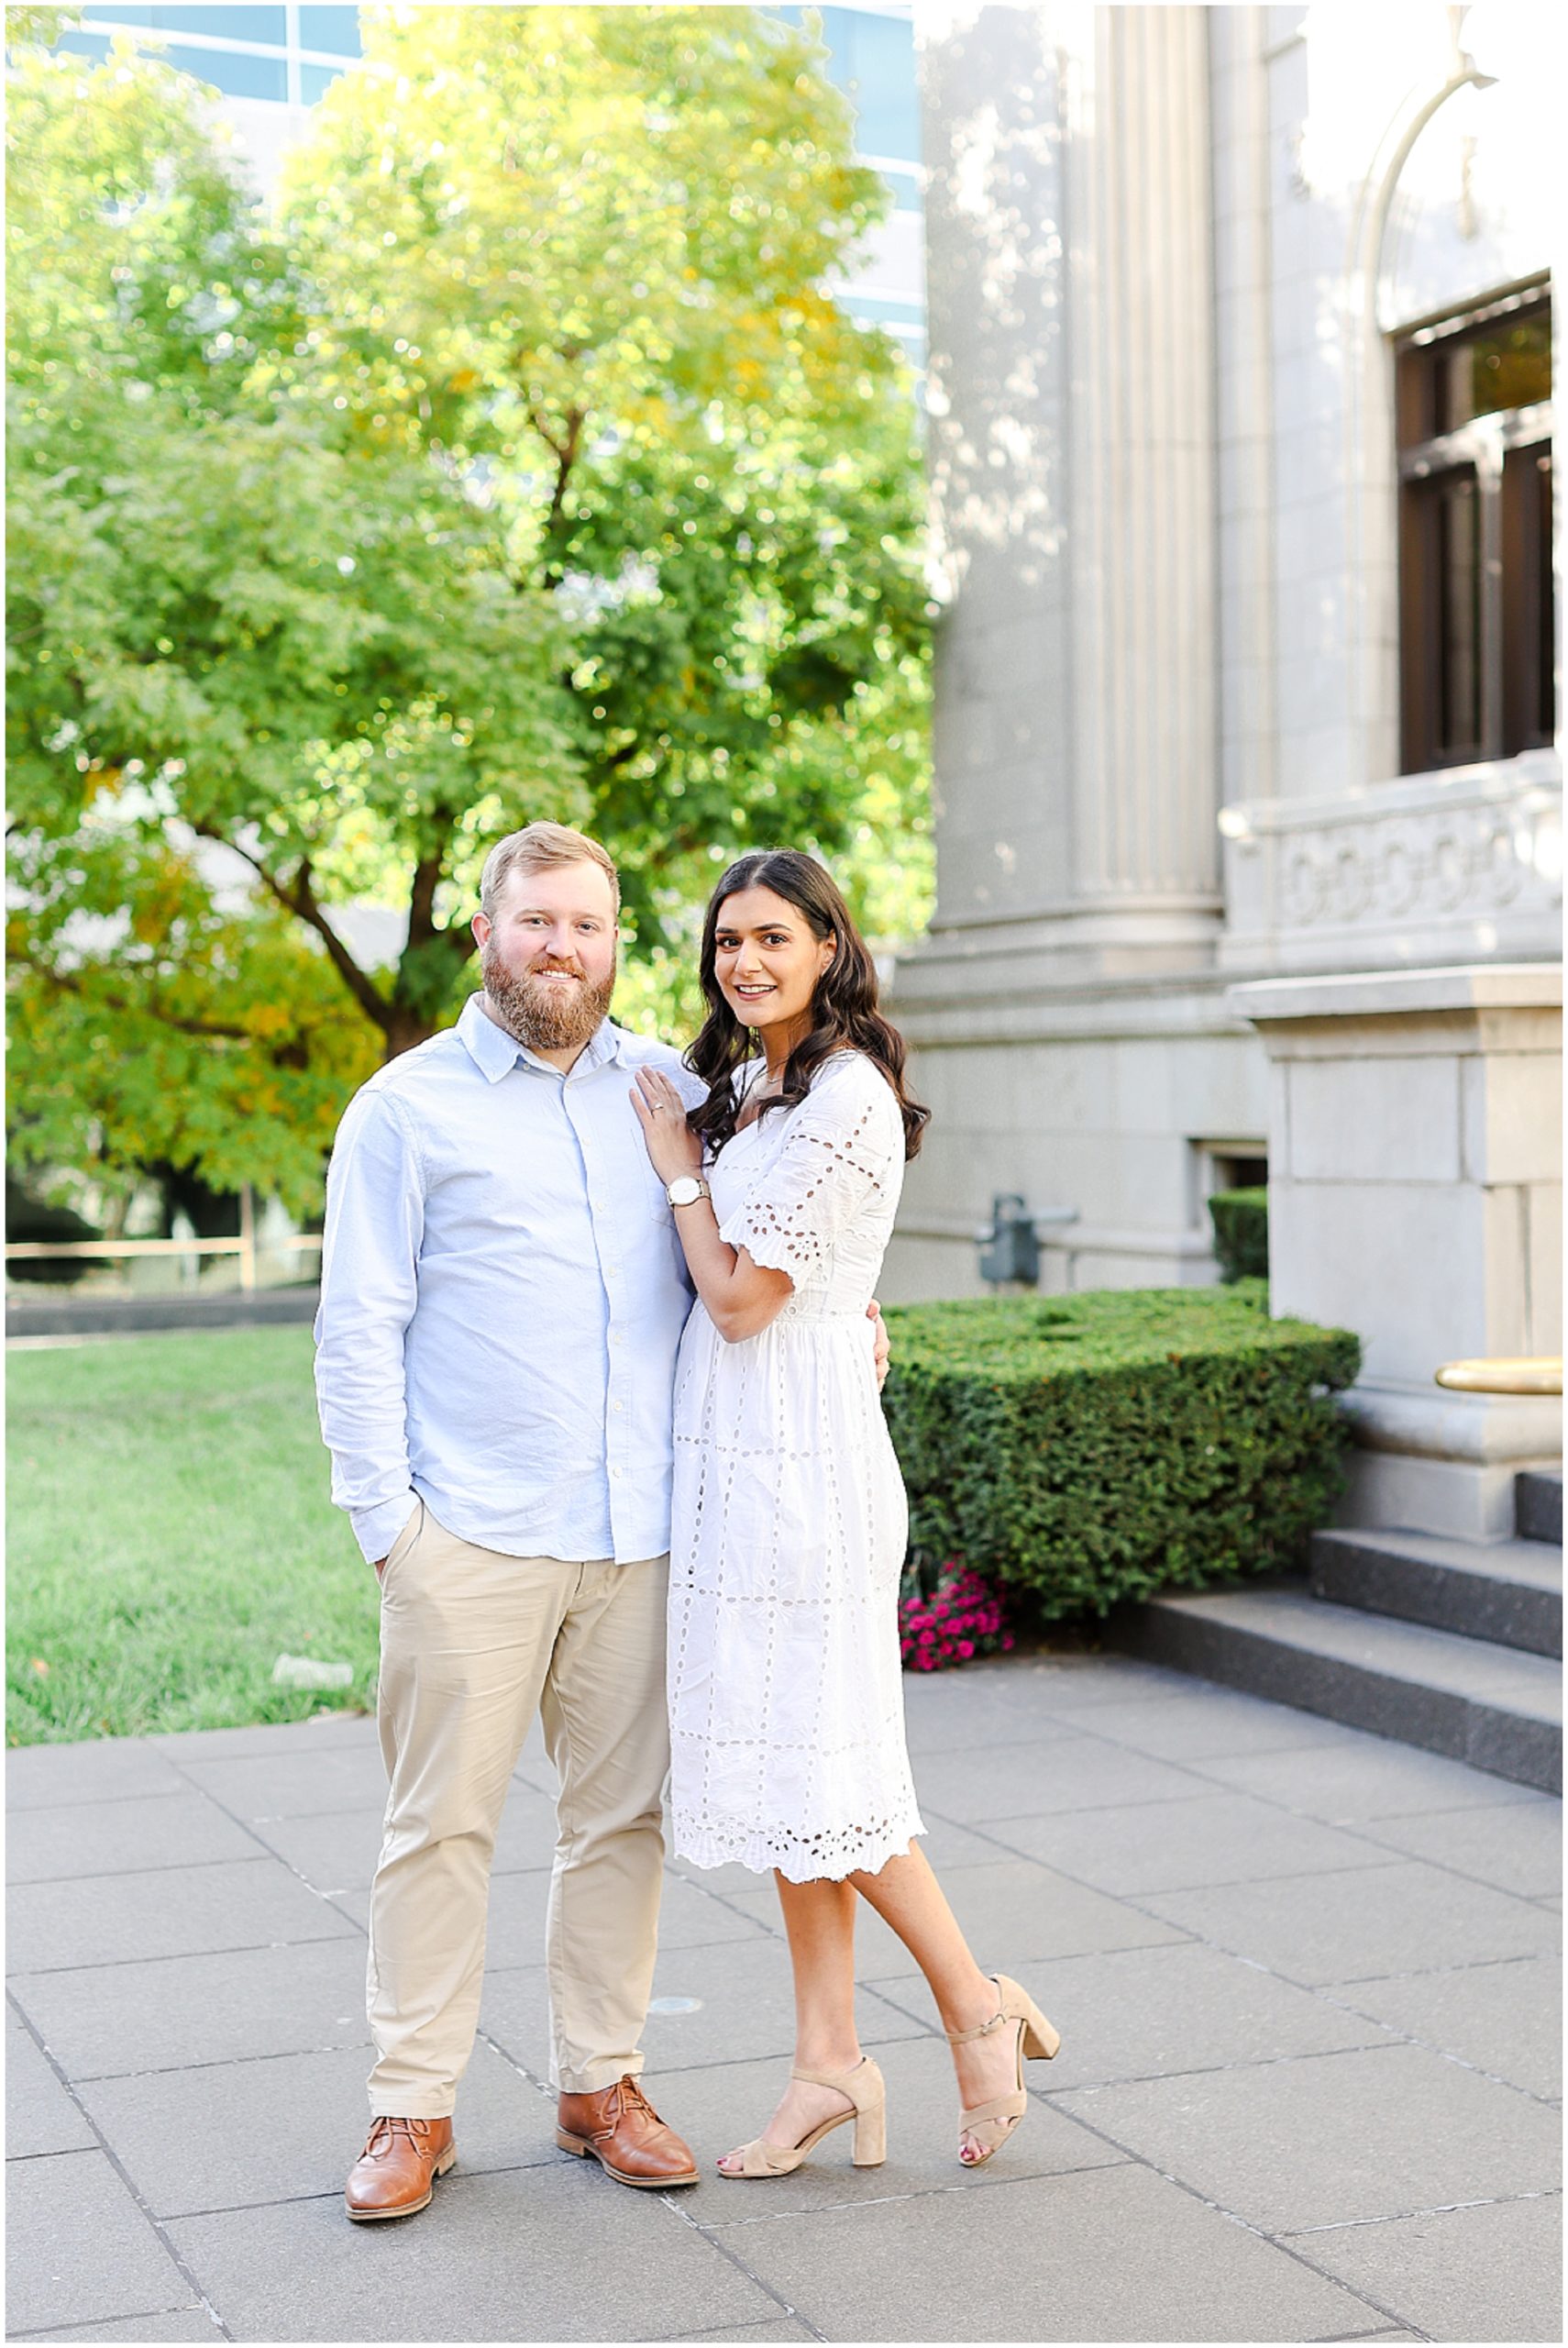 Kansas City Engagement Photographer - Mariam Saifan Photography - Where to Take Photos in Kansas - Indian Wedding - Bardot - Indian Wedding Photography Kansas City - Nelson Atkins - What to Wear Engagement - Family Photographer